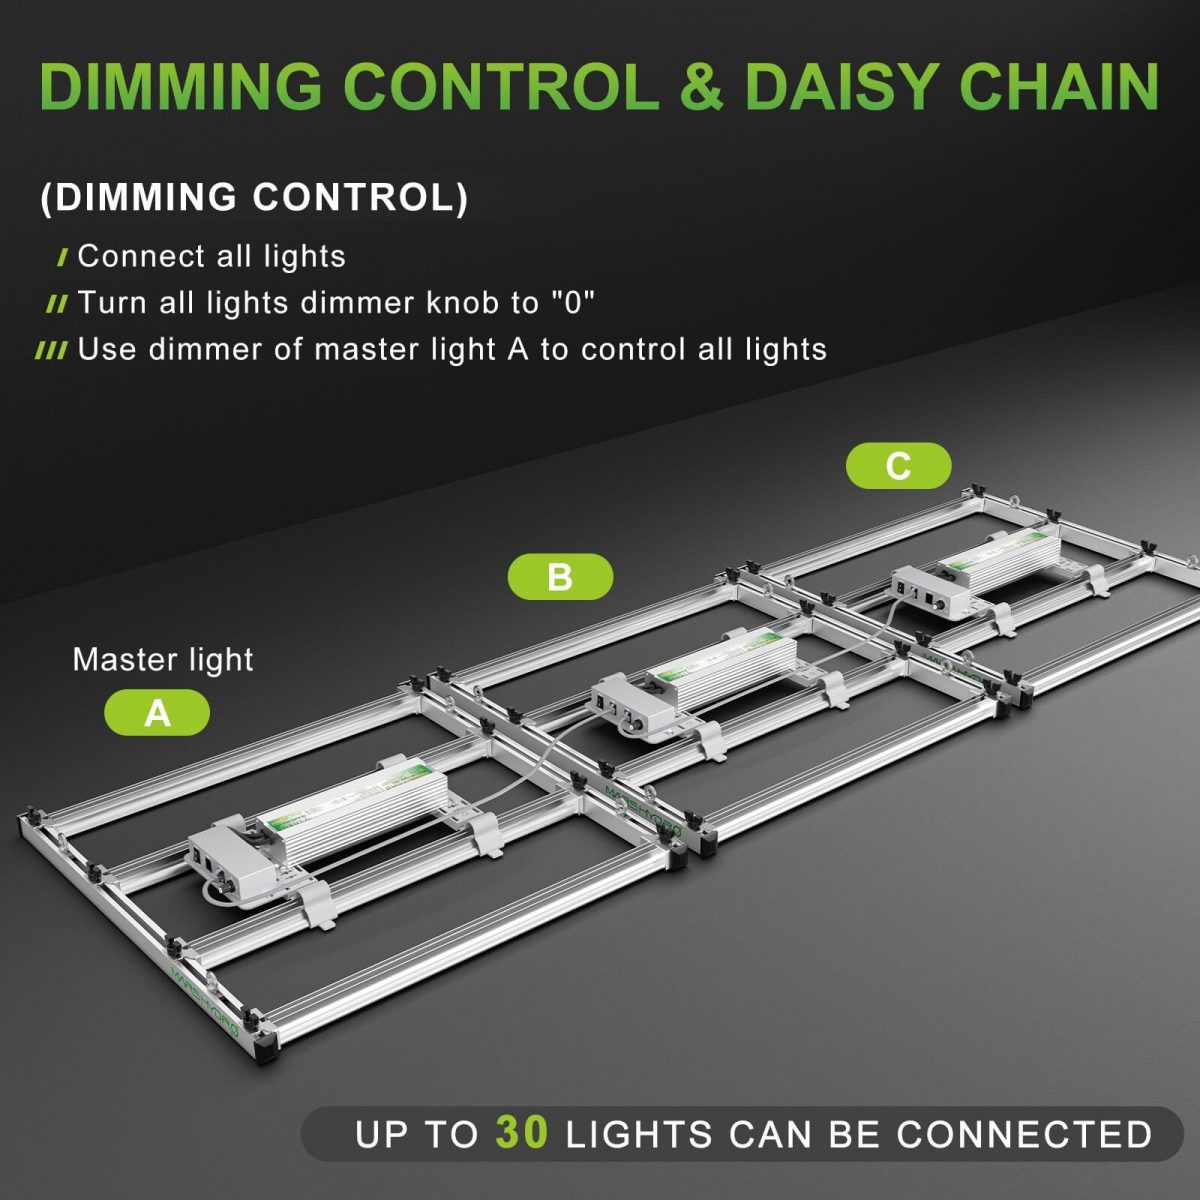 FC-E3000 LED grow lights support dimming daisy chain function to adjust light intensity of up to 30 LEDs with one dimmer.